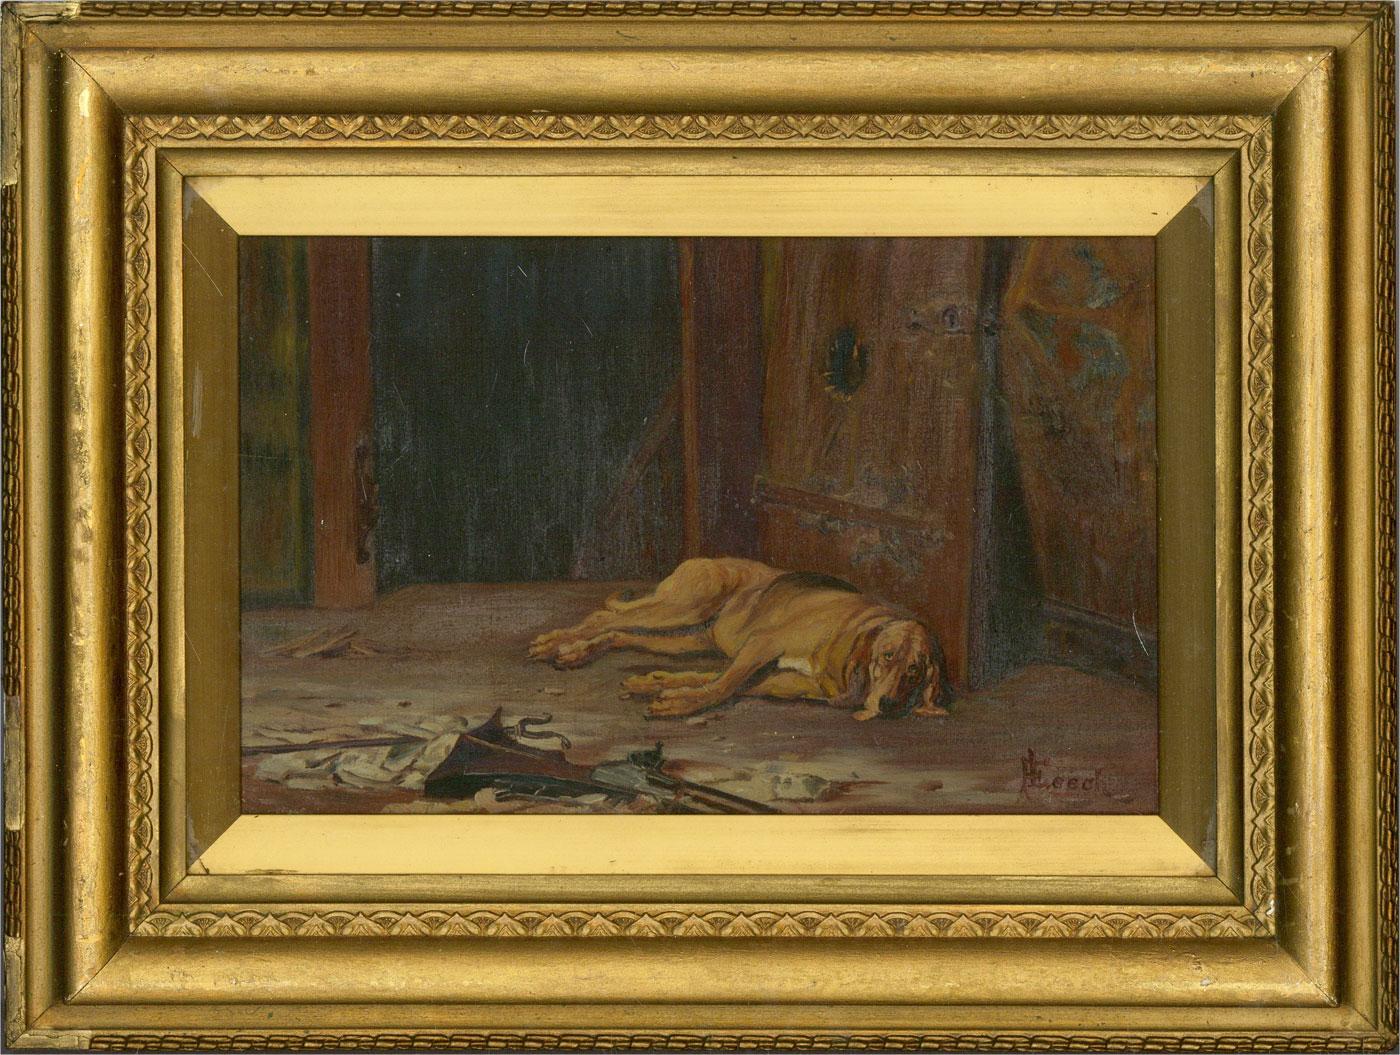 A poignant early 20th Century oil interior, showing a tired old bloodhound resting on the floor by a door that is loose on its hinges with a gunshot hole in the wood. Debris covers the floor and a shotgun can be seen in the foreground. It appears as